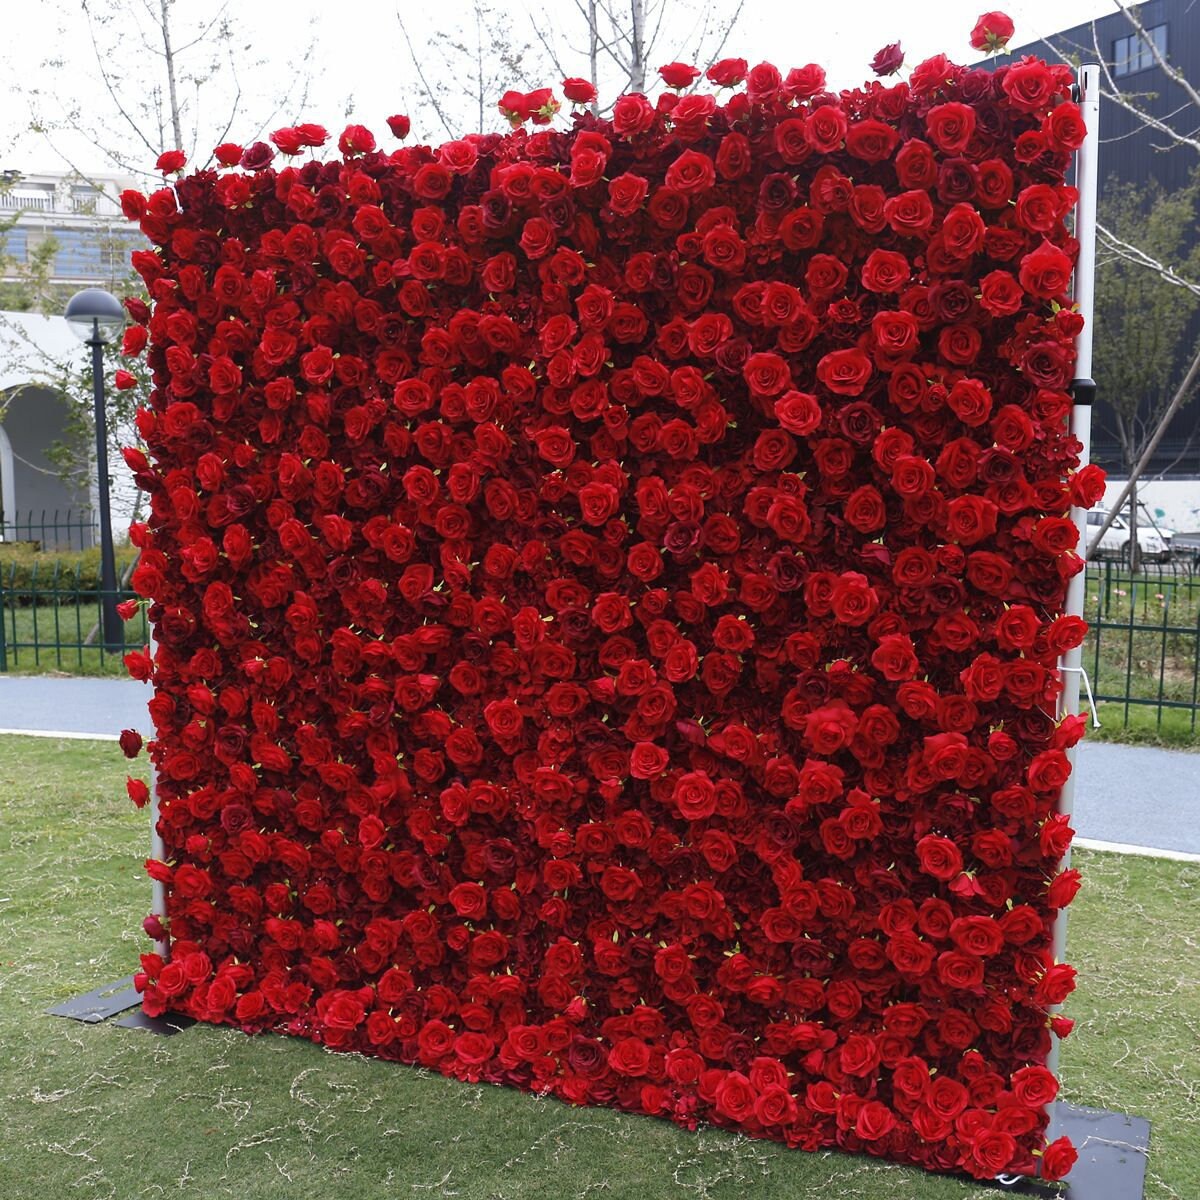 Full Red Flower Wall For Wedding Arrangement Event Salon Party Photography Backdrop Fabric Rolling Up Curtain Fabric Cloth